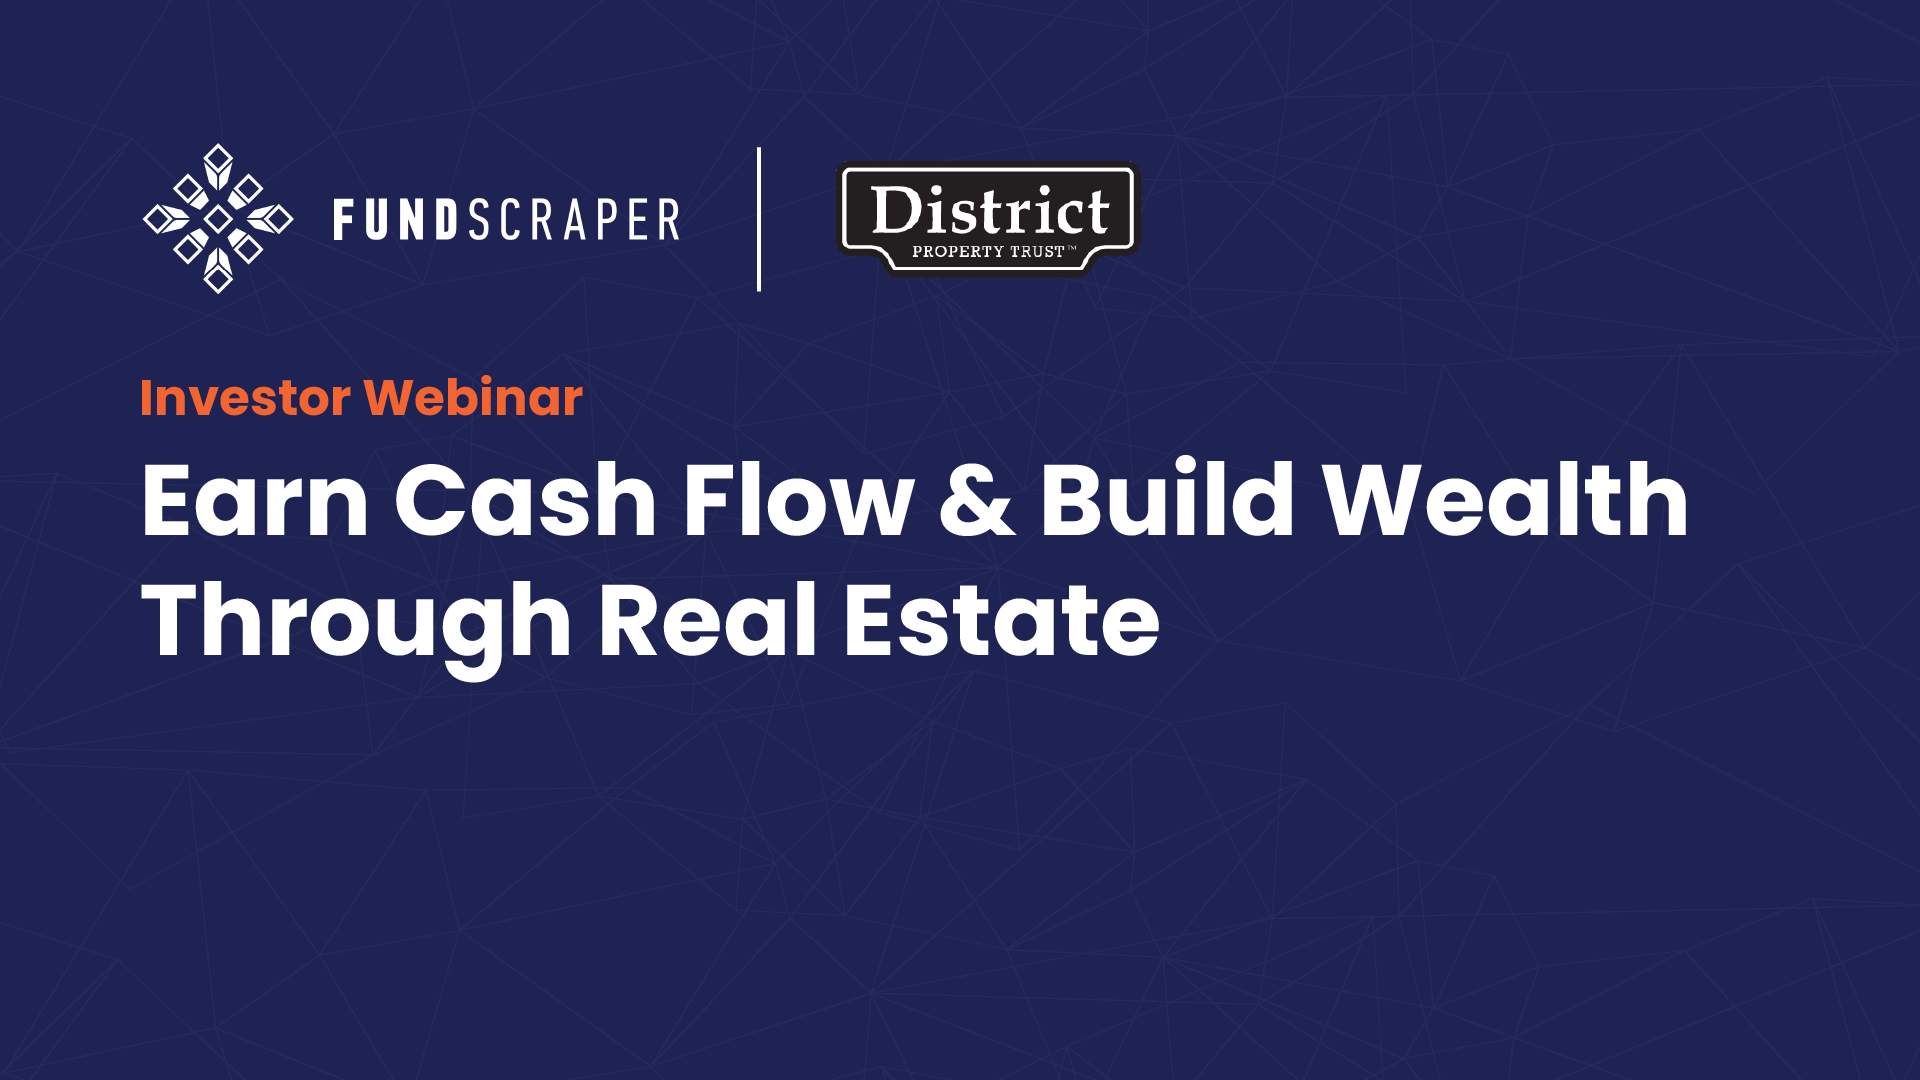 Earn Cash Flow & Build Wealth Through Real Estate with District REIT